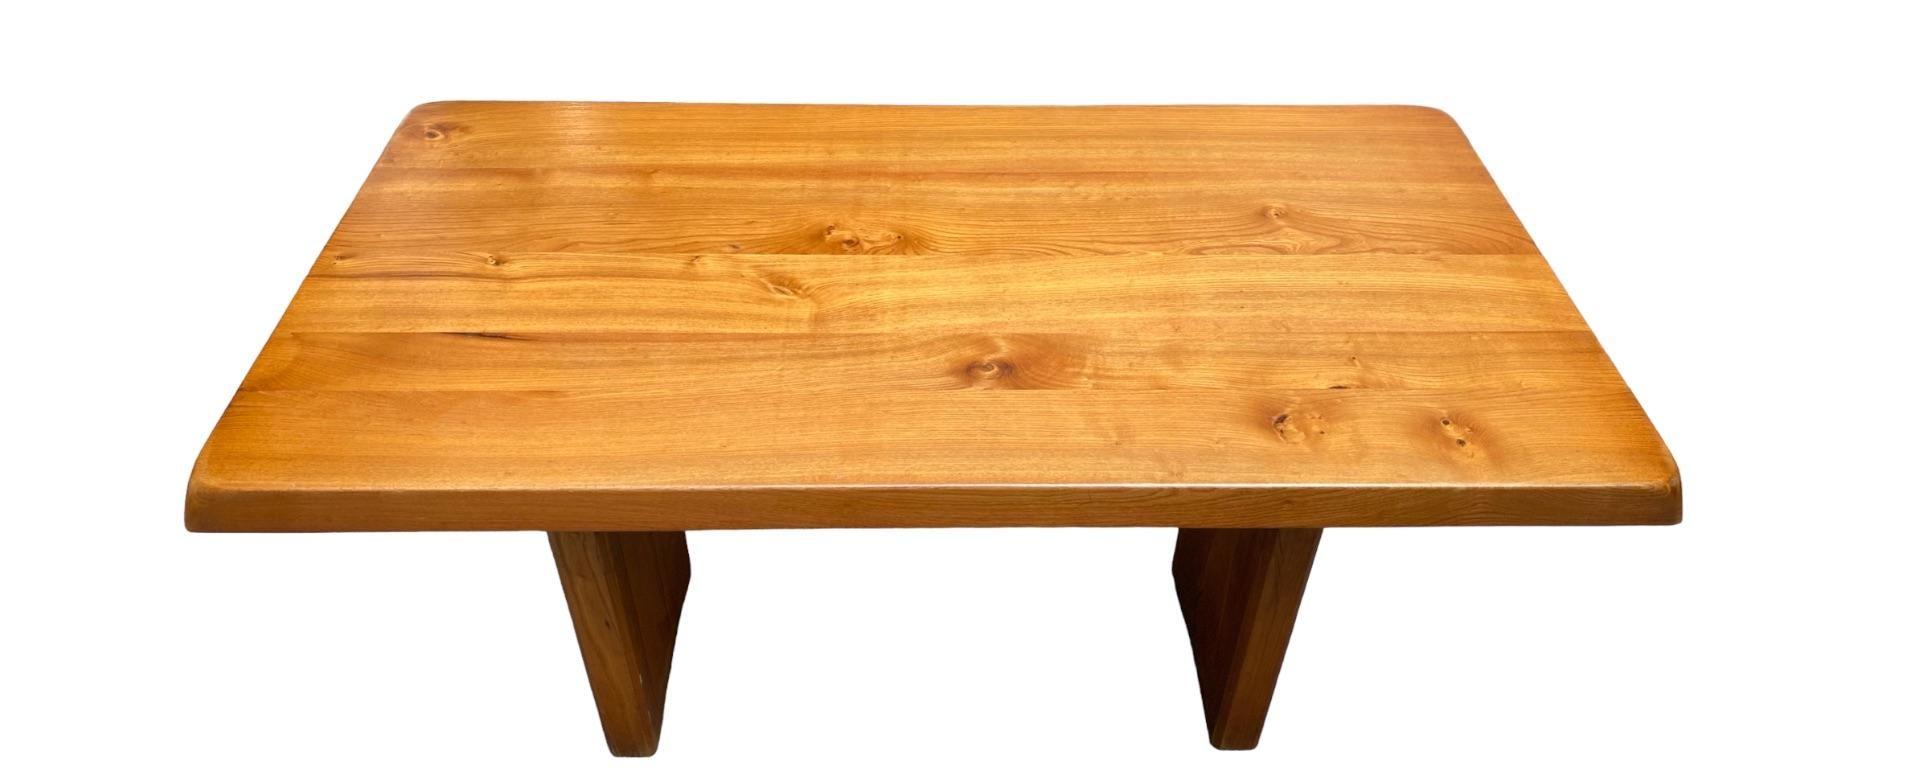 Superb Table T14 by Pierre Chapo, circa 1960 For Sale 3